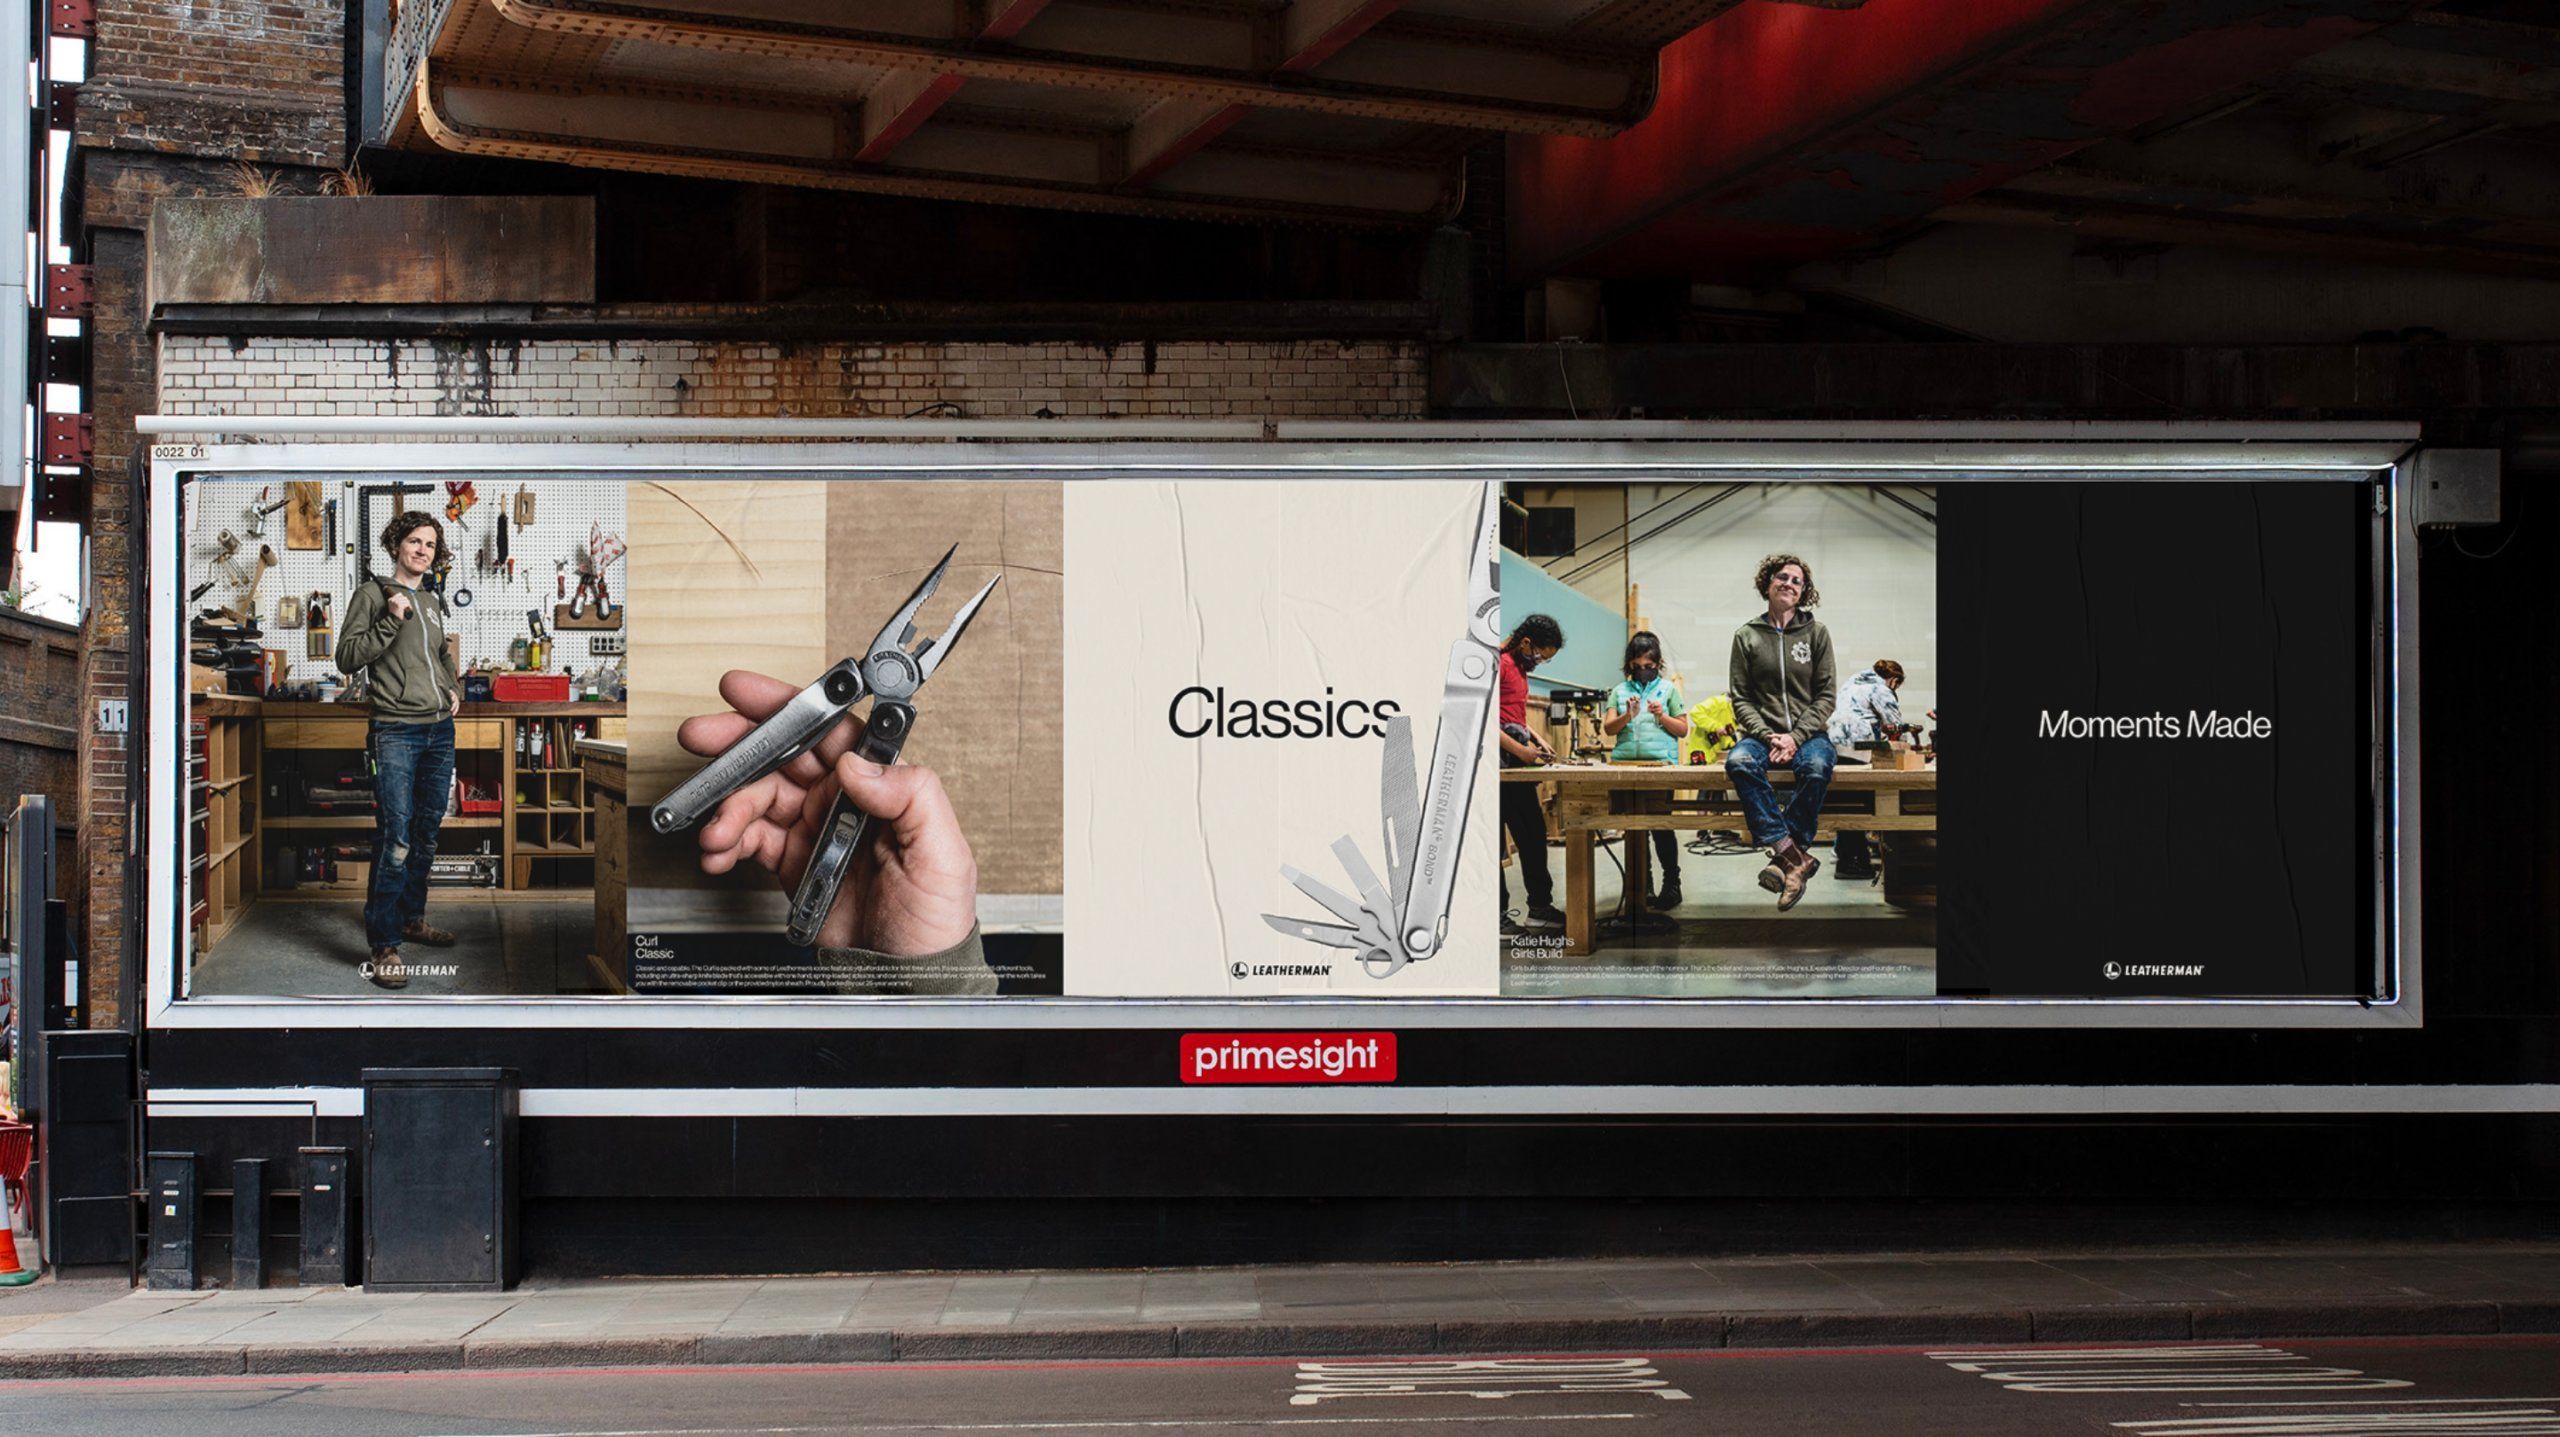 Leatherman Classics Moments made billboard featuring women working in shop woodworking class and close up of leatherman tool